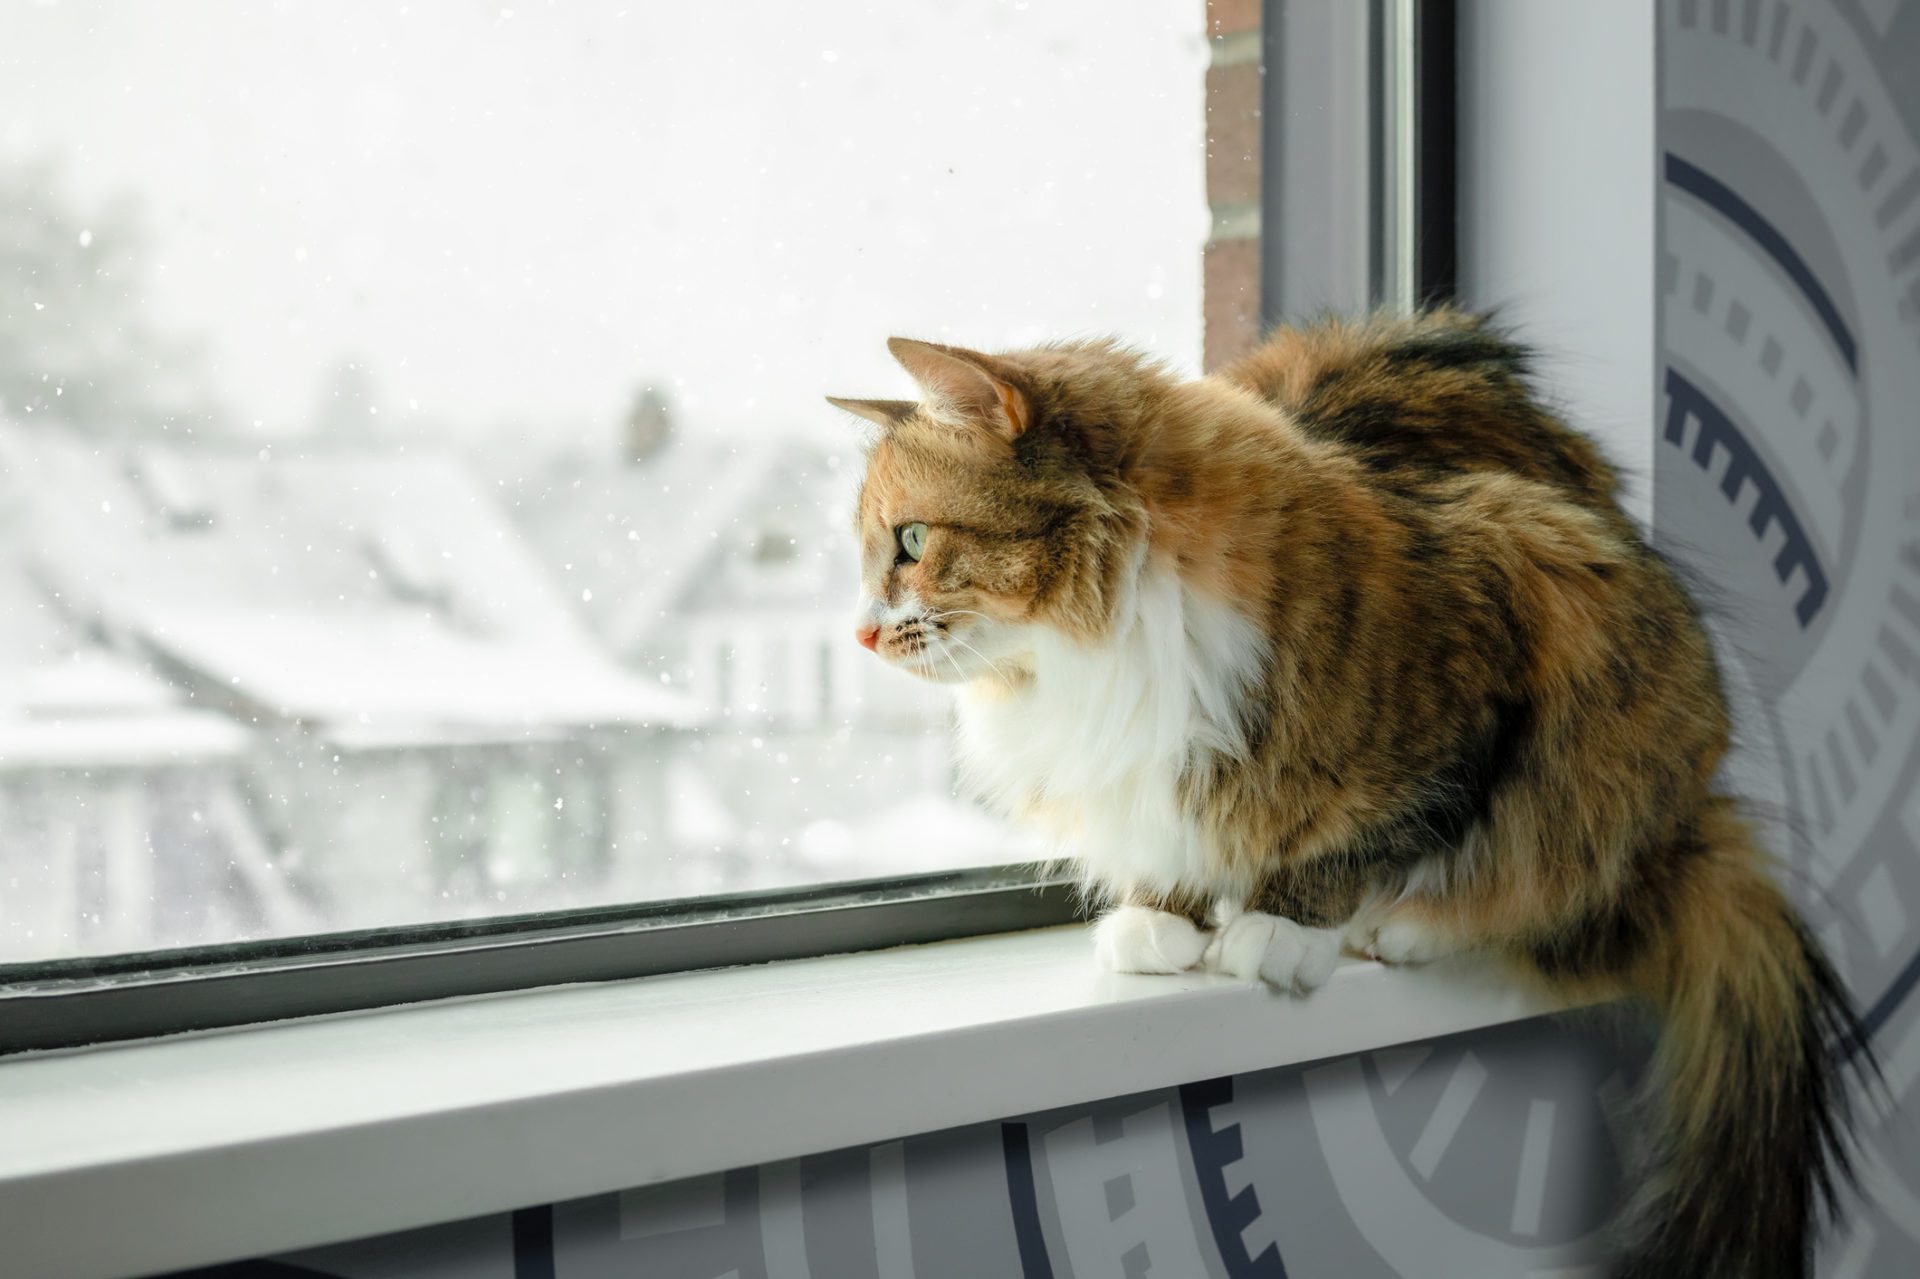 Protect your animals from General Winter Hazards